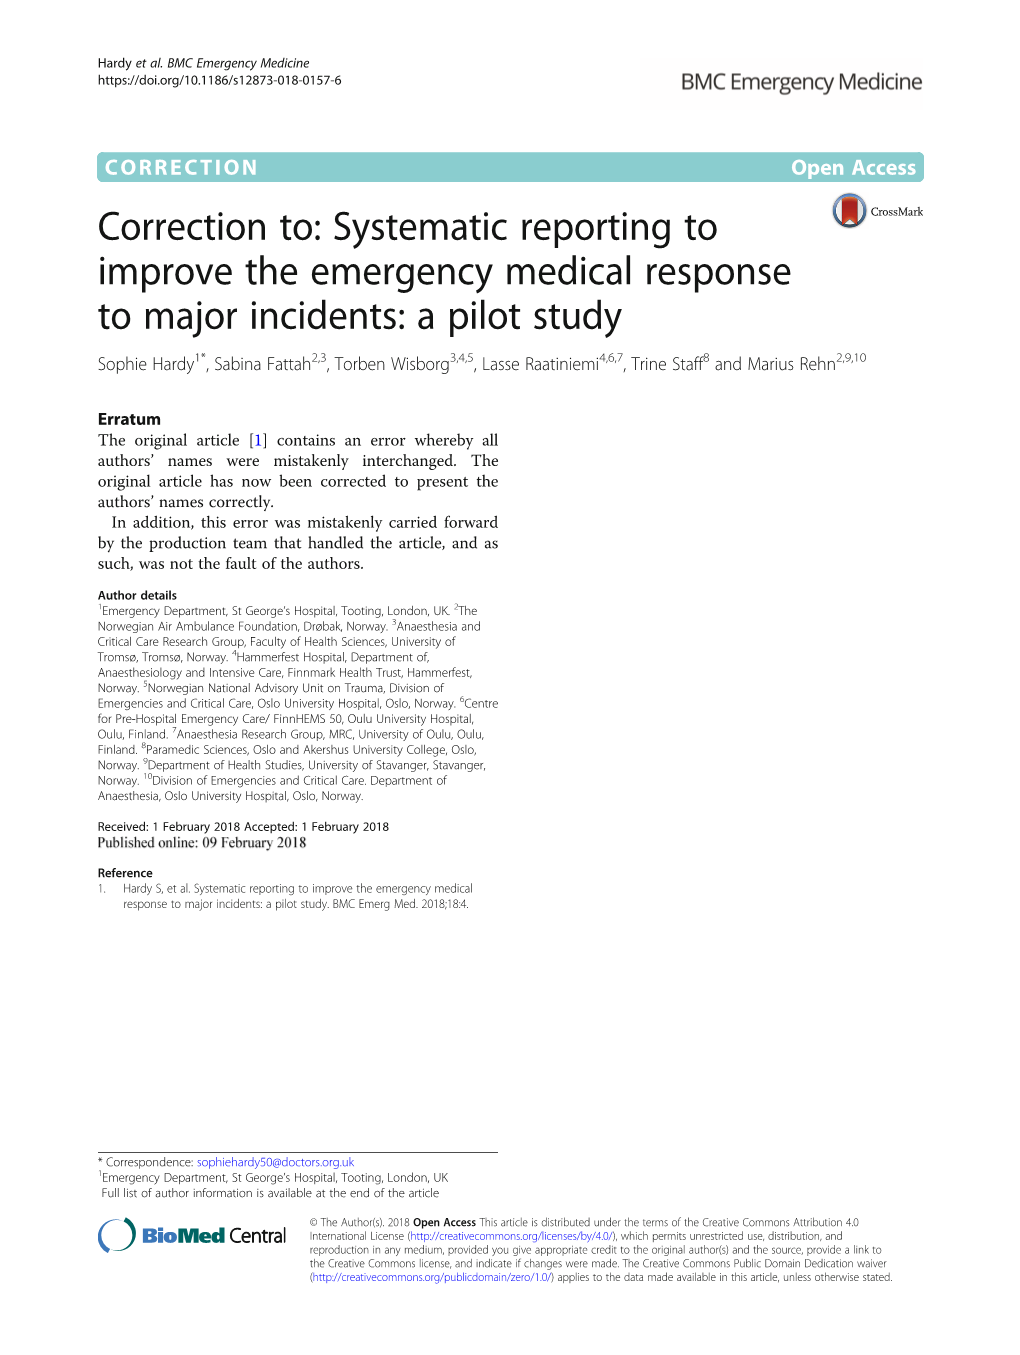 Systematic Reporting to Improve the Emergency Medical Response To